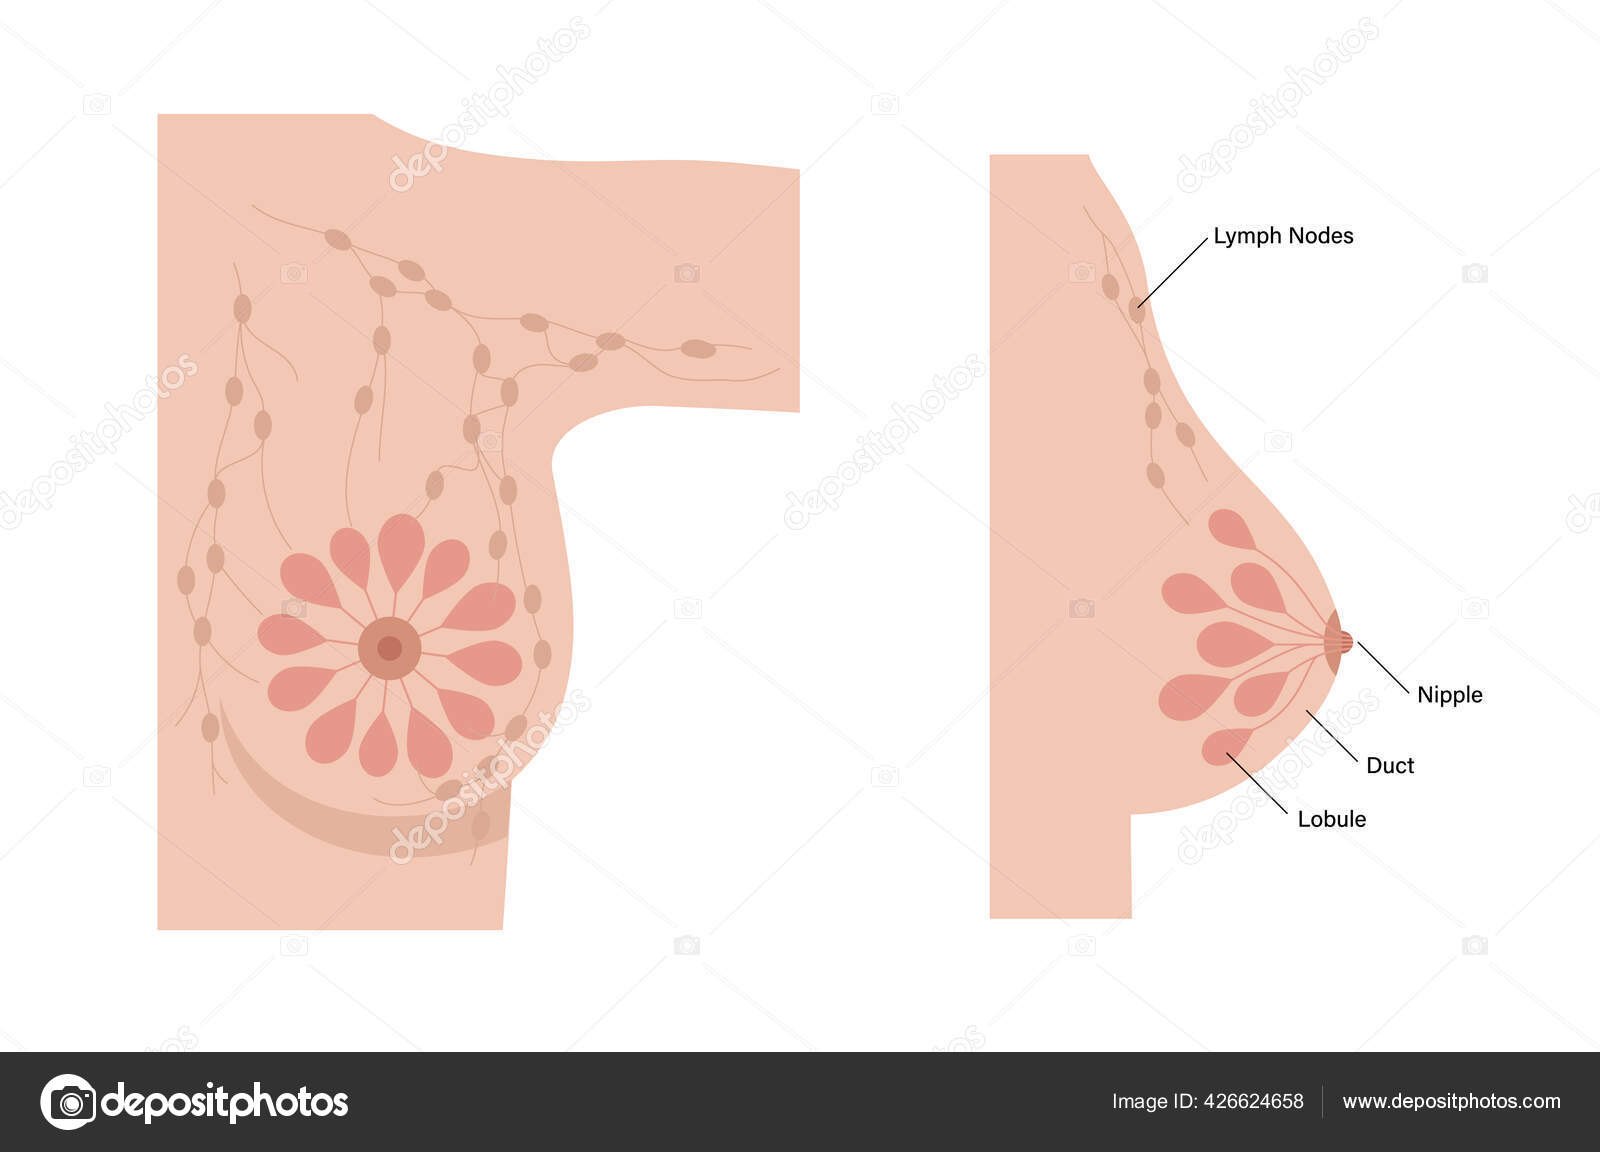 The Female Breast Poster